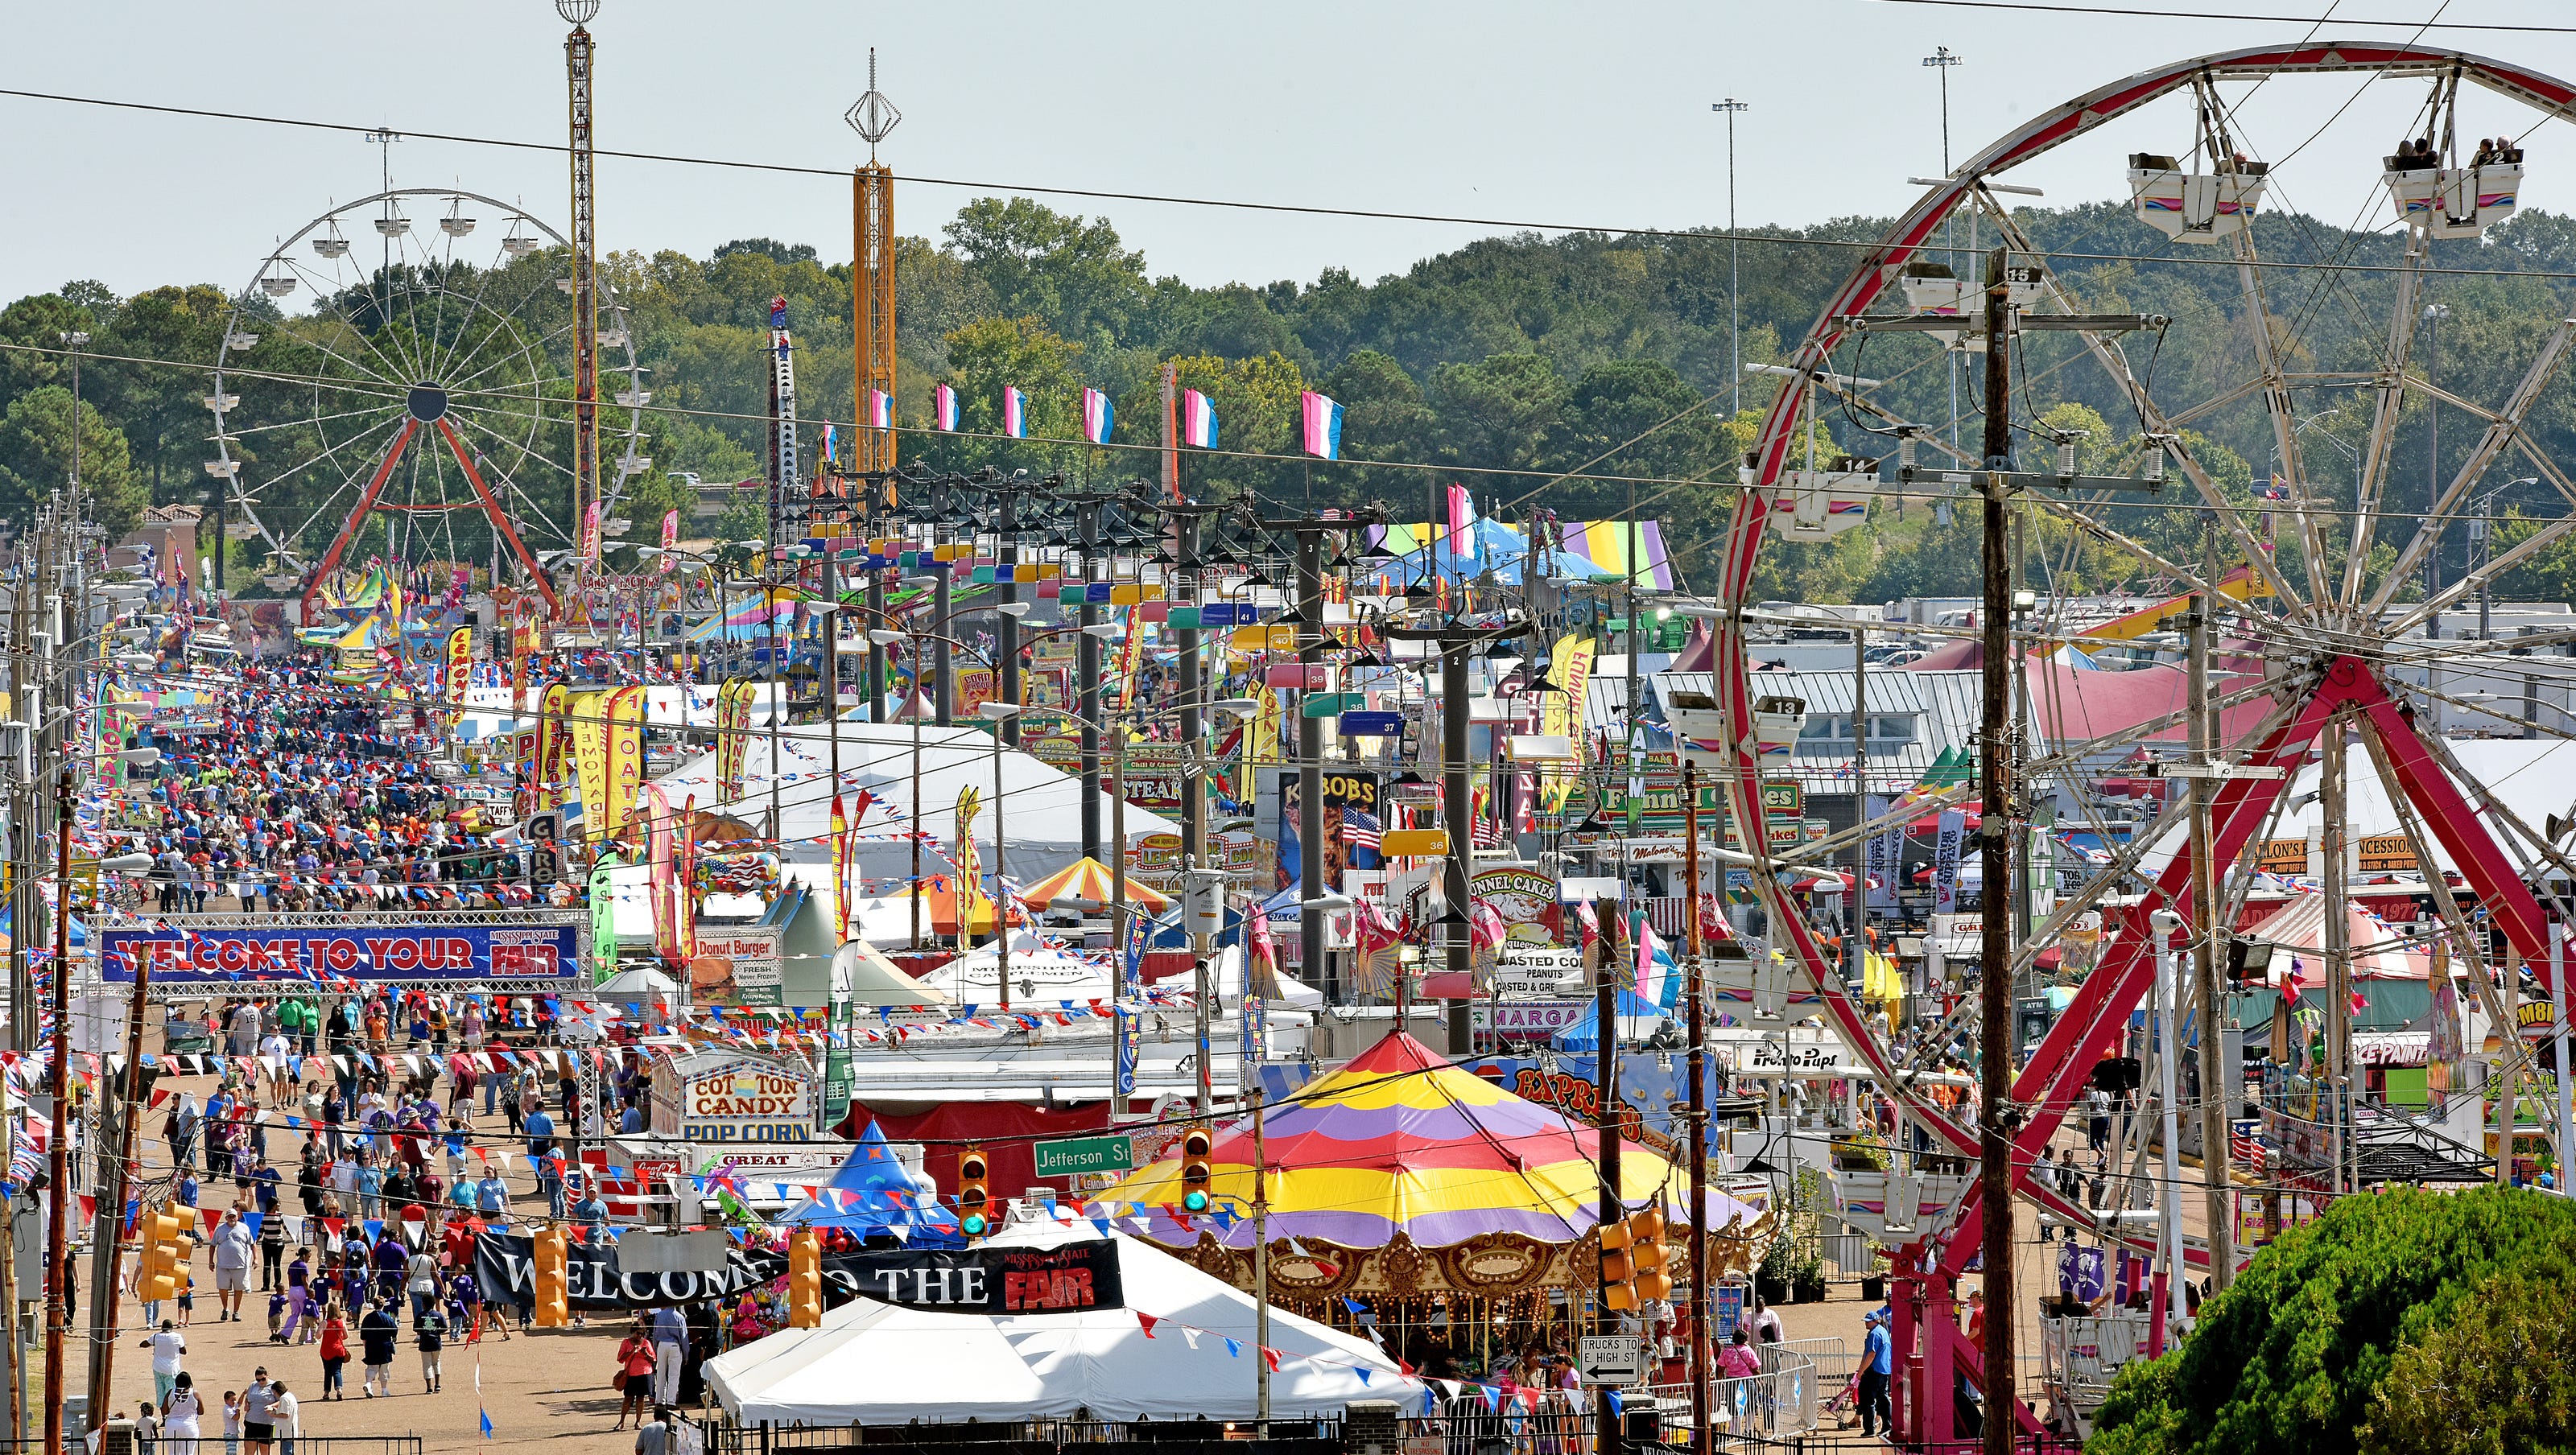 MS State Fair in Jackson best day, best deals to cut cost, save money